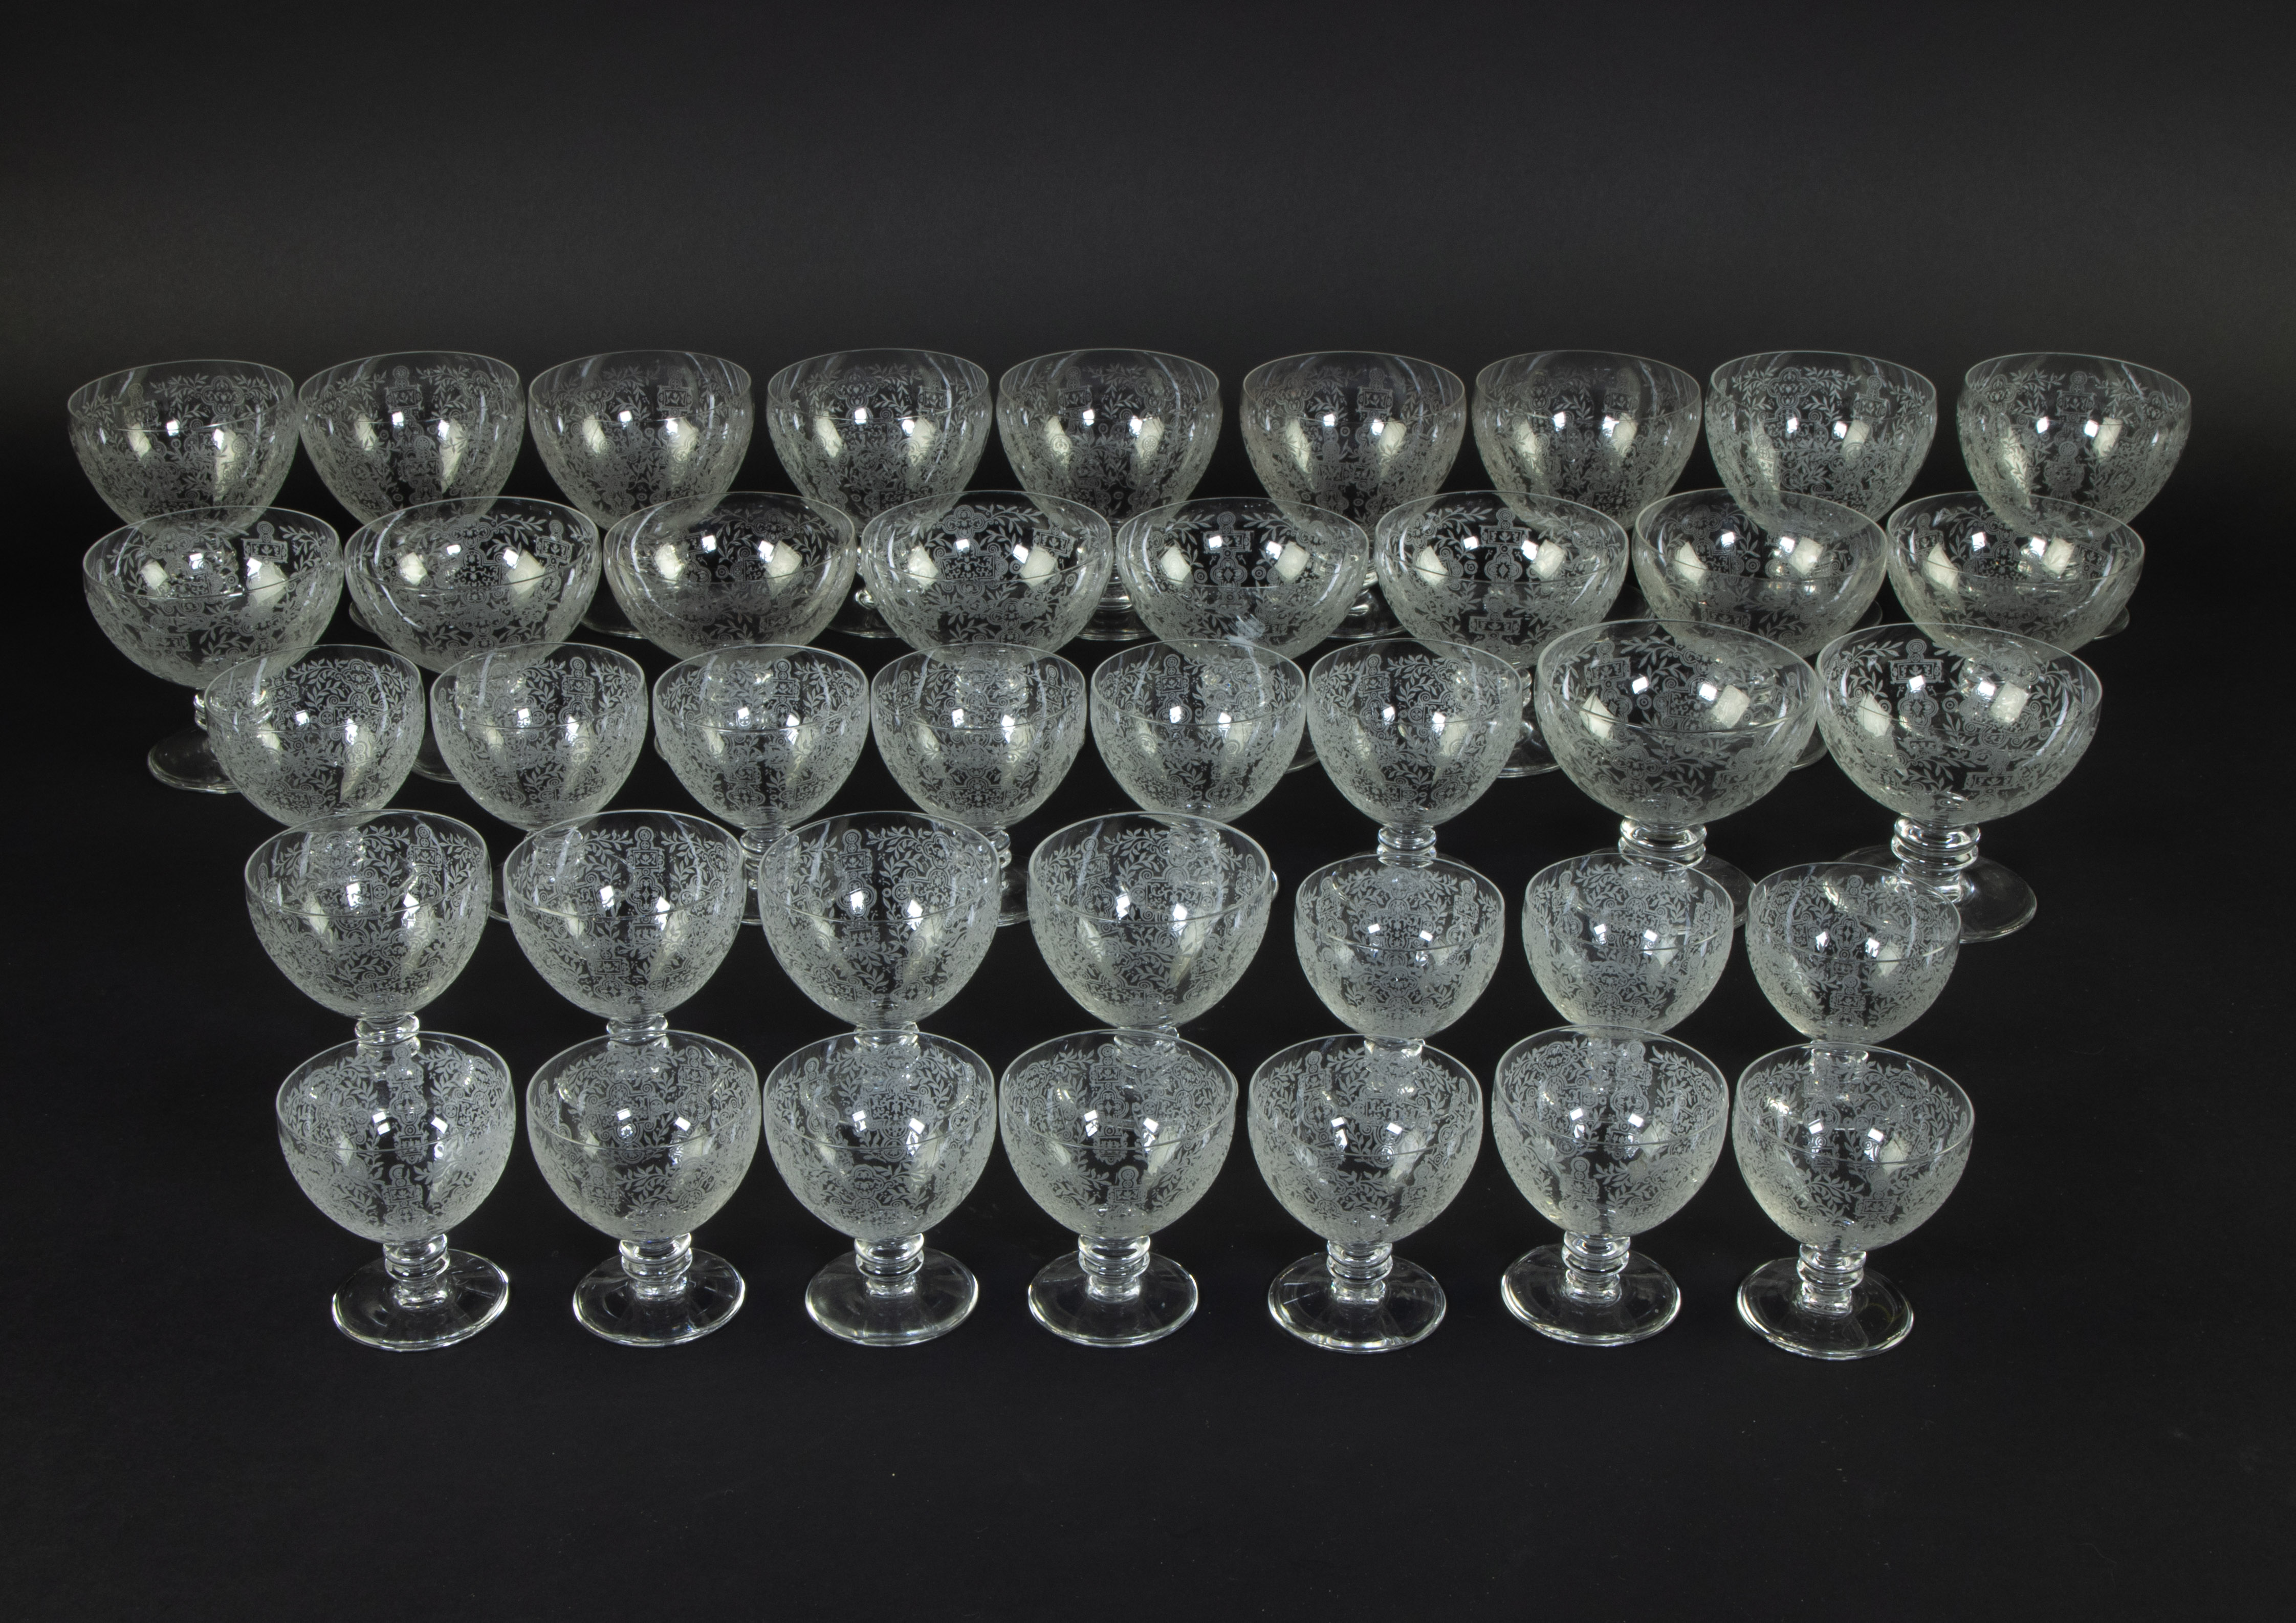 Collection of 39 Baccarat crystal glasses